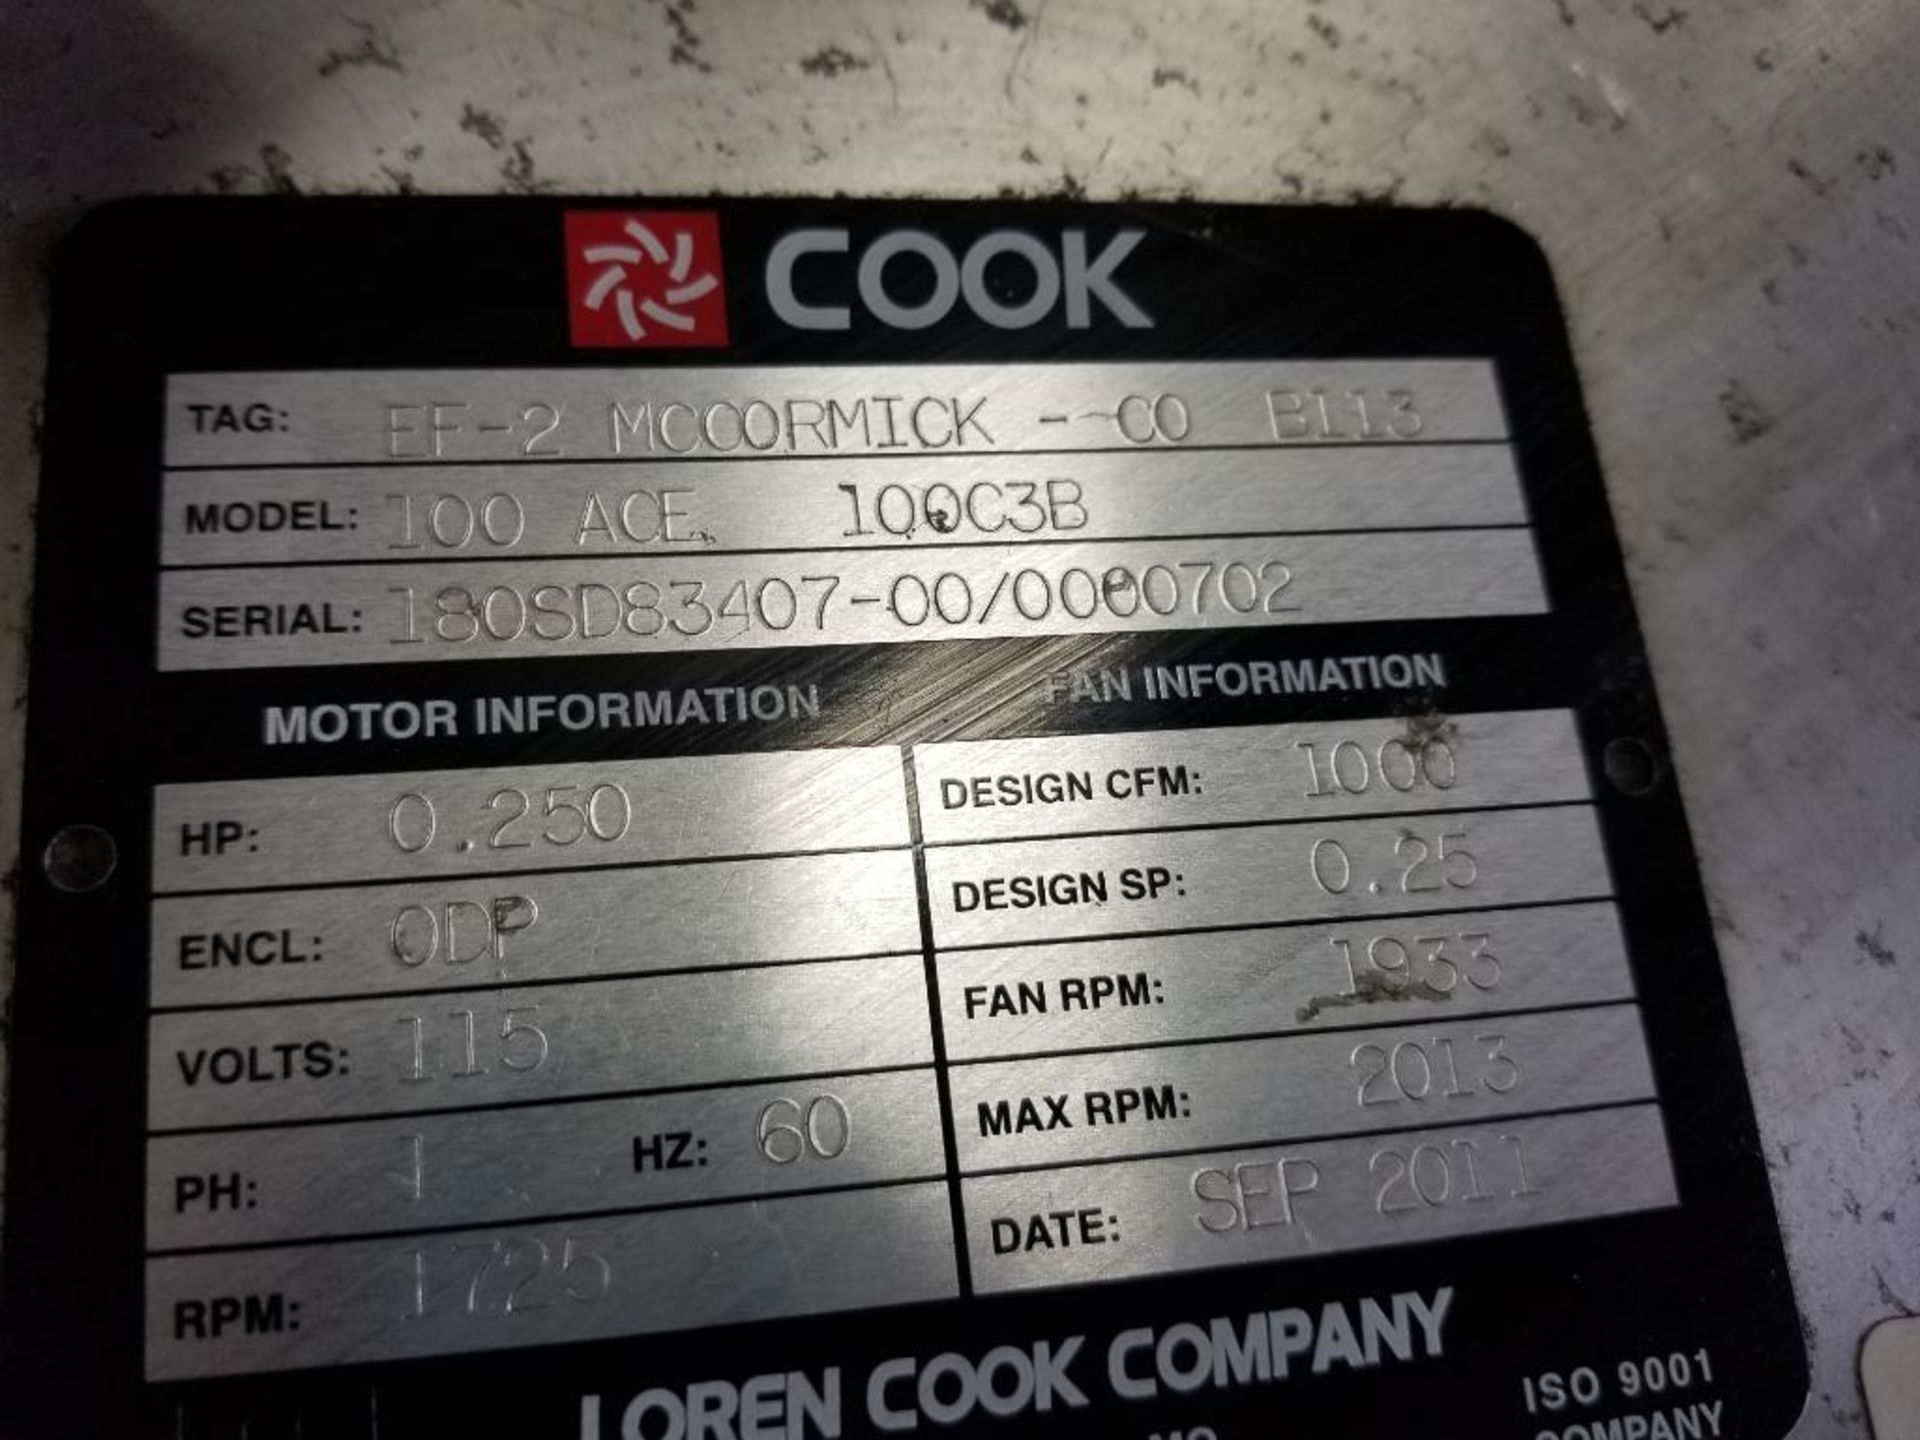 1/4hp Cook exhaust fan. Model 100ACE, 100C3E. 1000cfm. 115v single phase. - Image 3 of 4